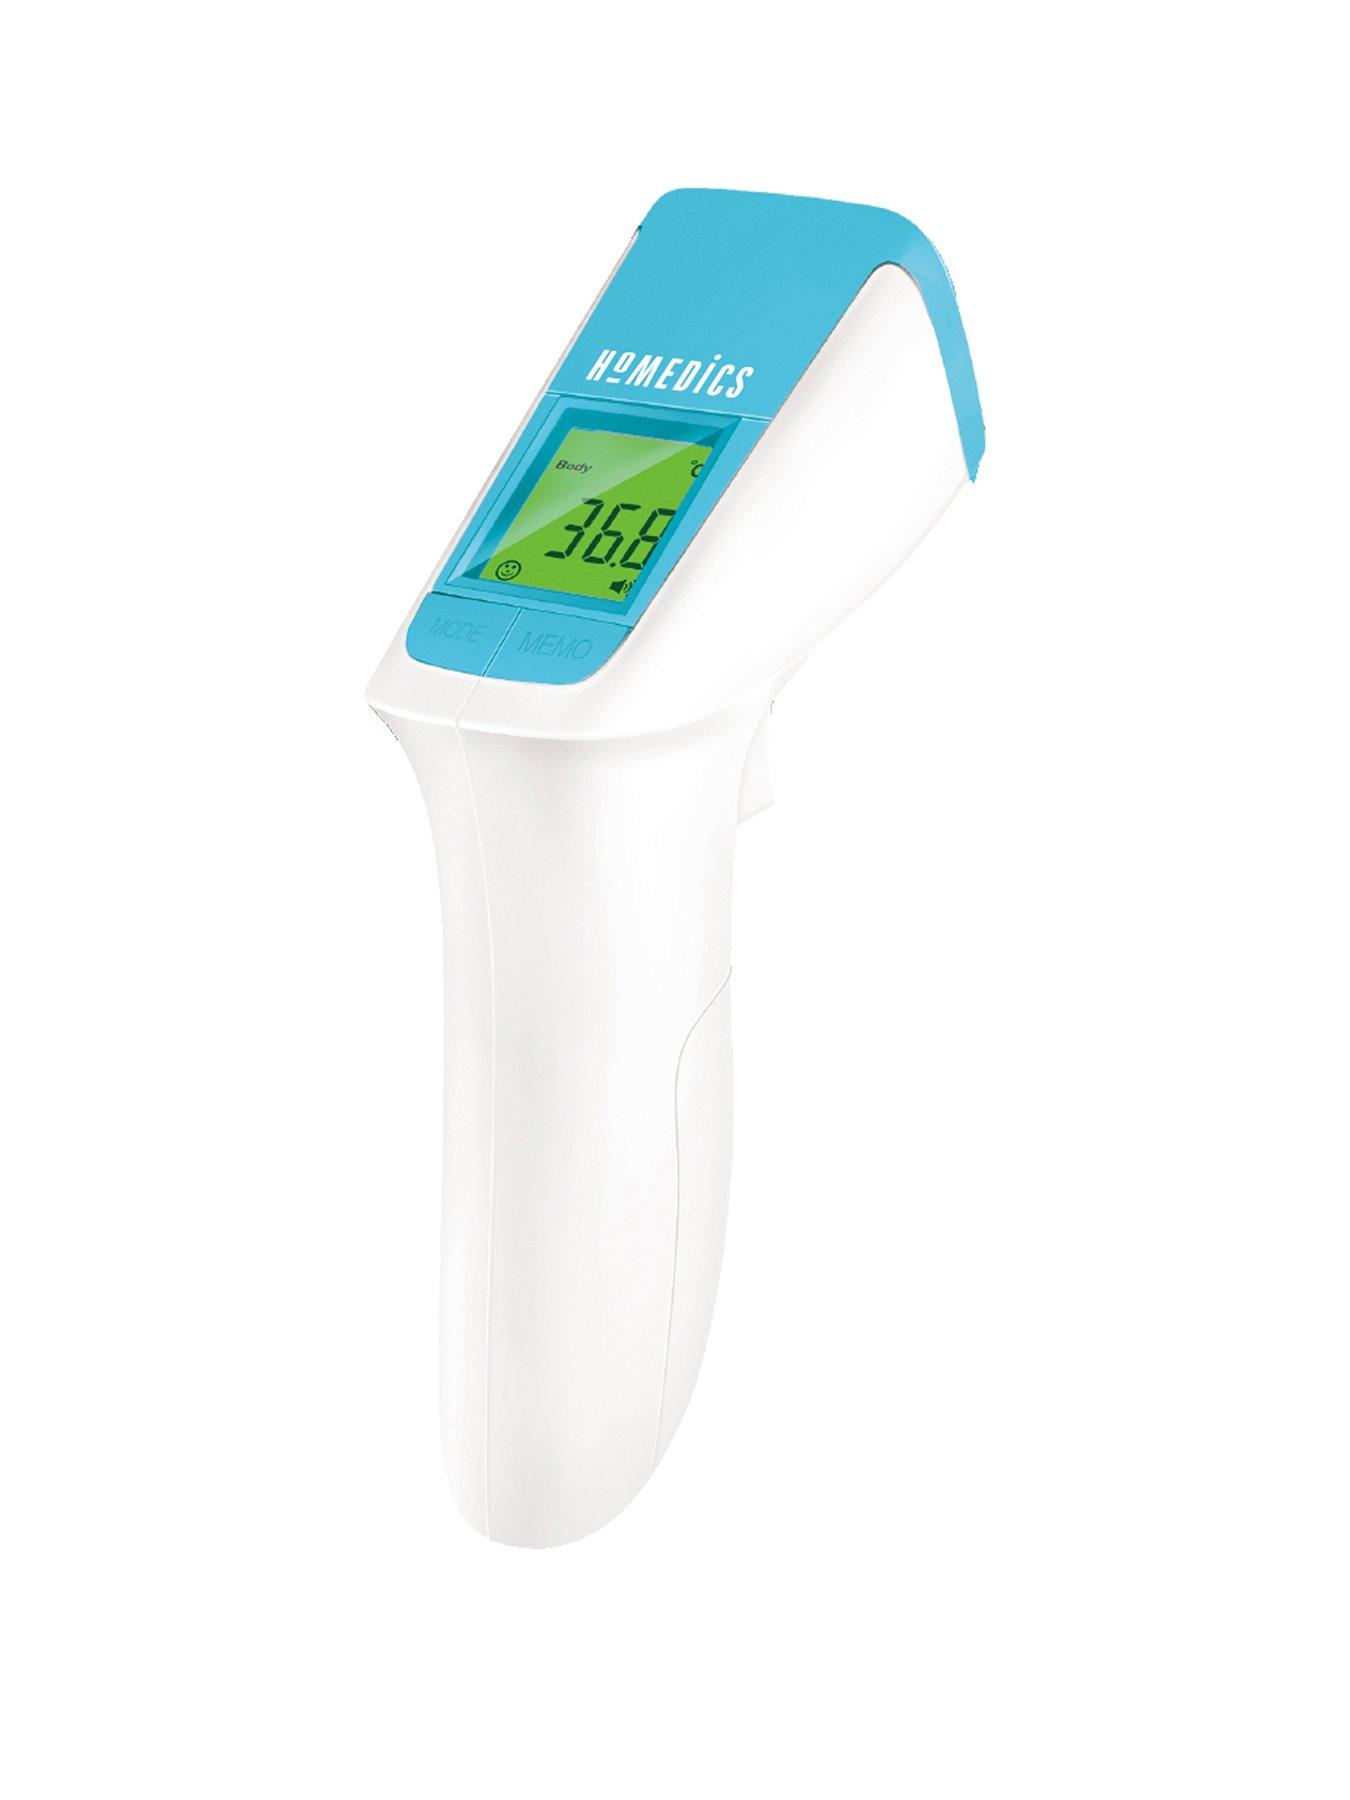 https://media.very.ie/i/littlewoodsireland/TL69K_SQ1_0000000099_N_A_SLf/homedics-homedics-non-contact-infrared-thermometer-results-in-less-than-2-seconds.jpg?$180x240_retinamobilex2$